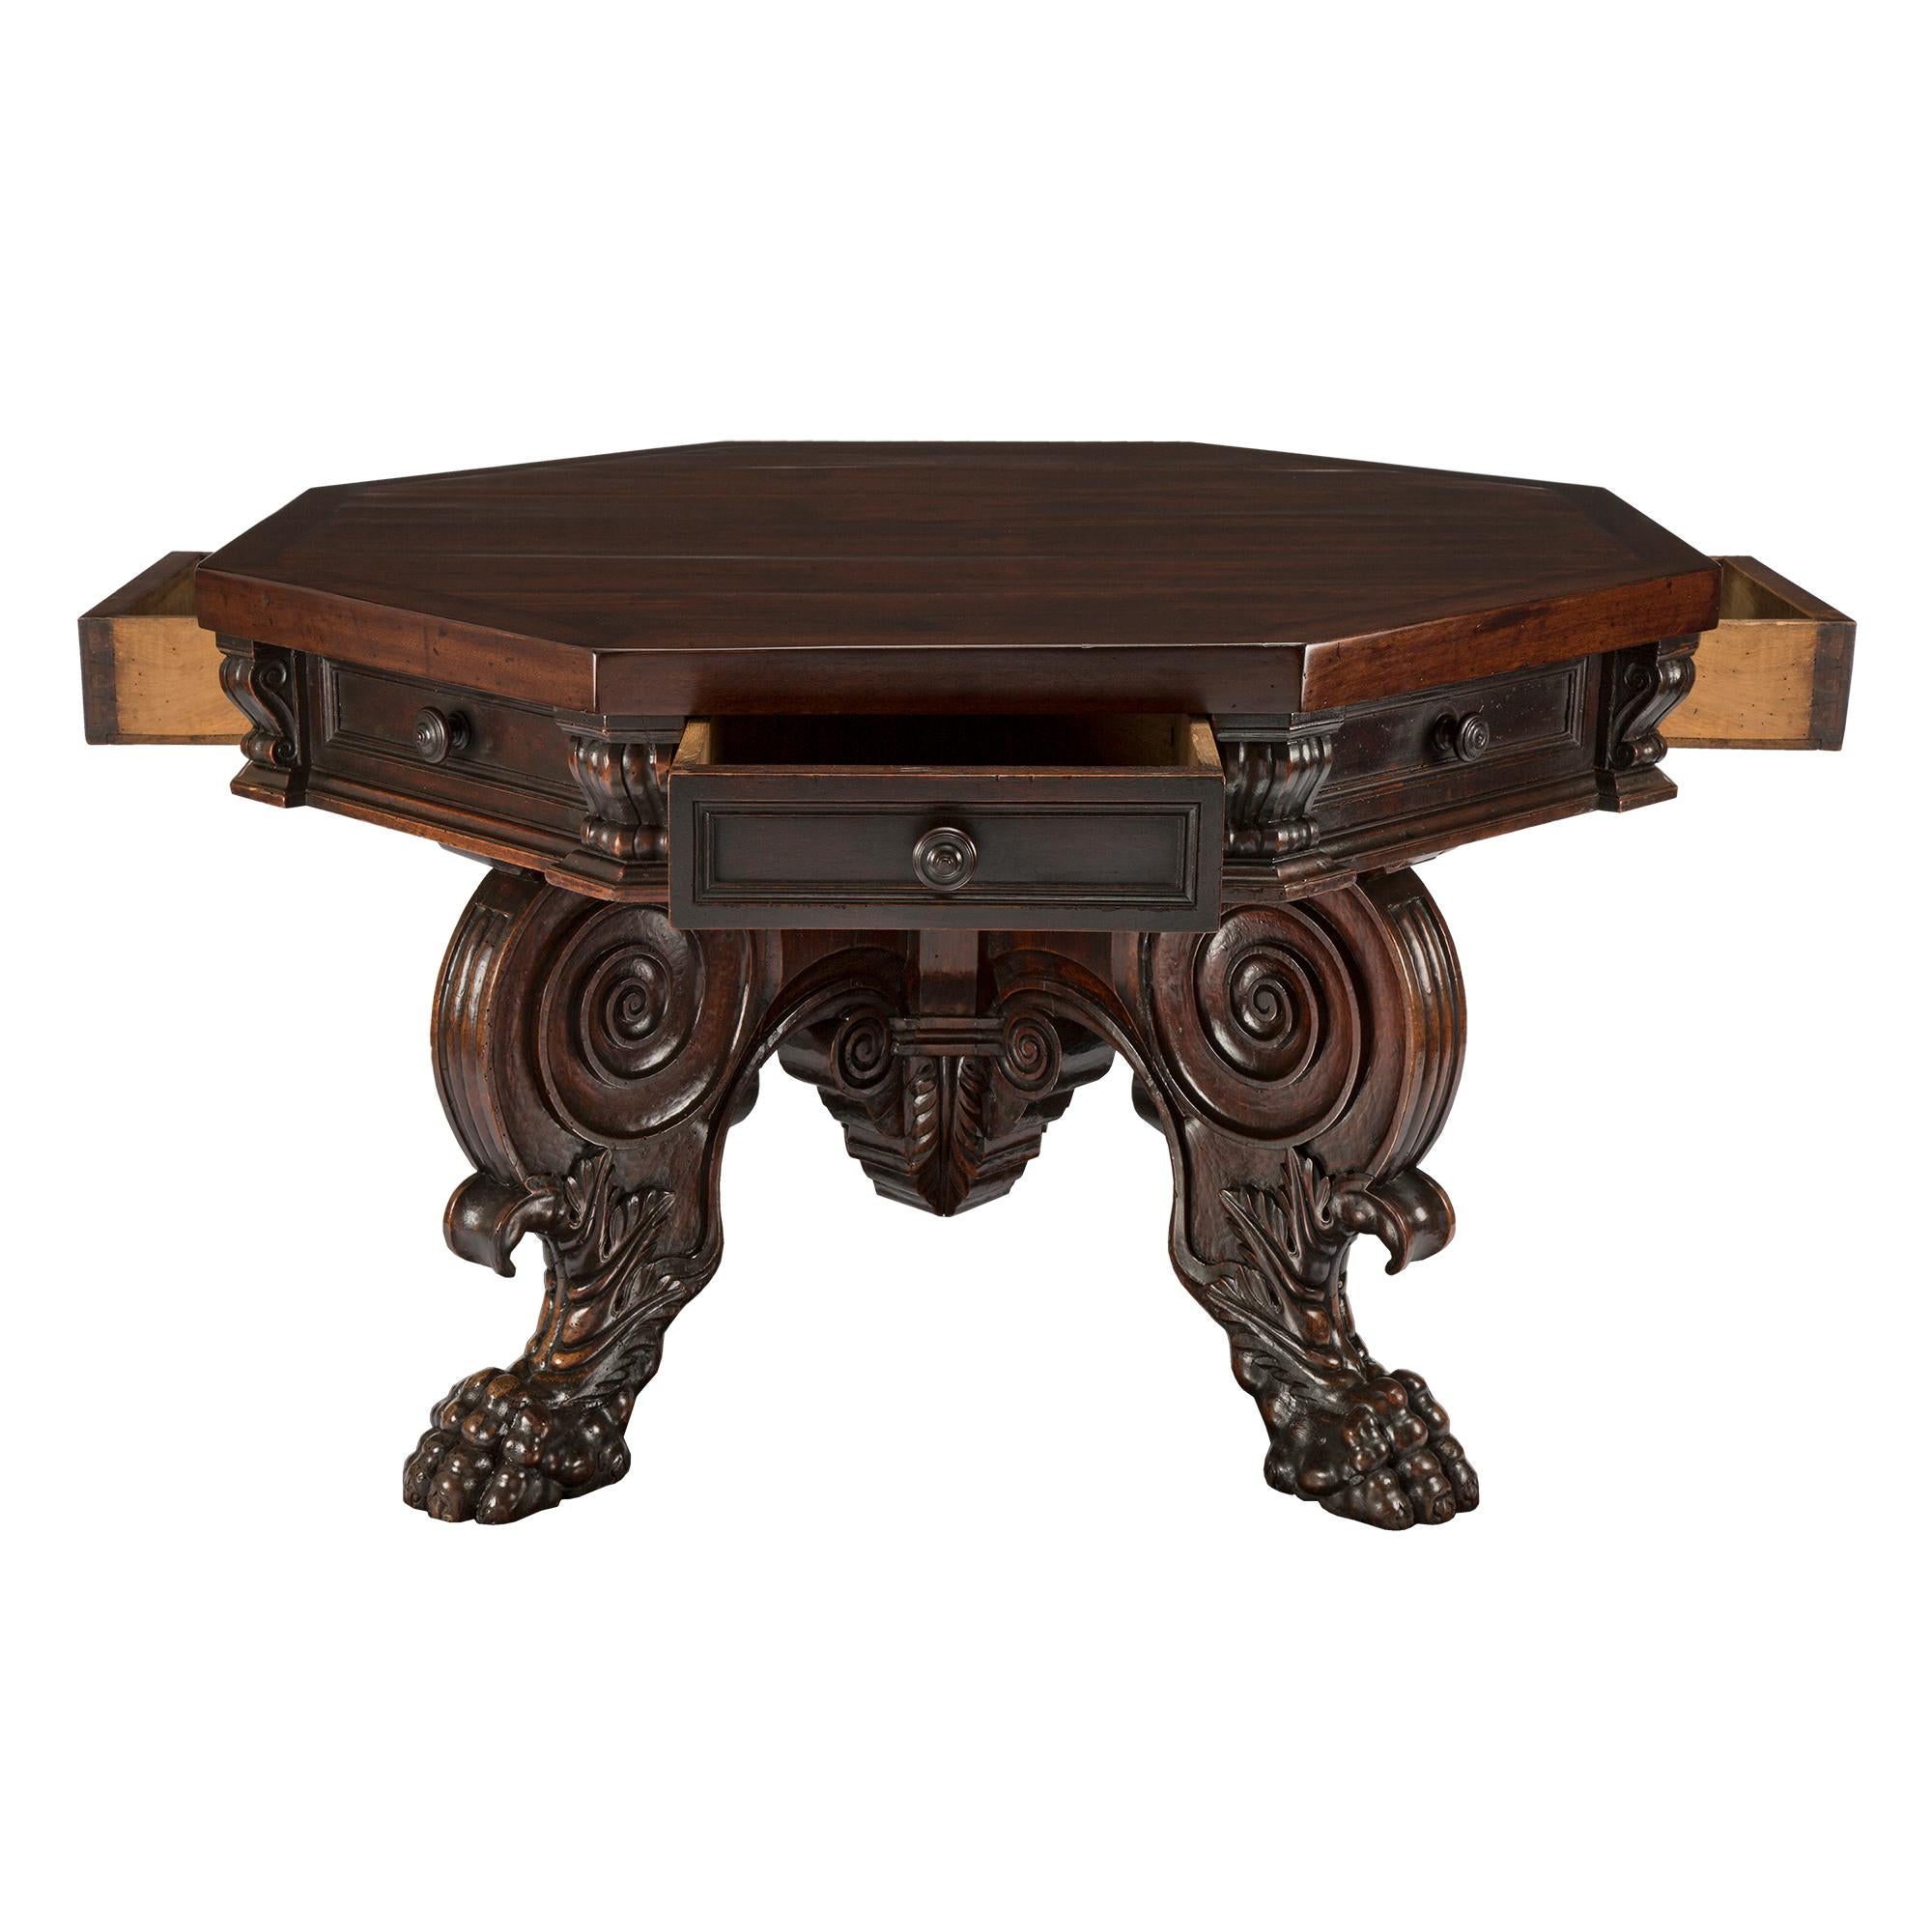 Italian 17th Century Baroque Period Solid Walnut Octagonal Center Table For Sale 1